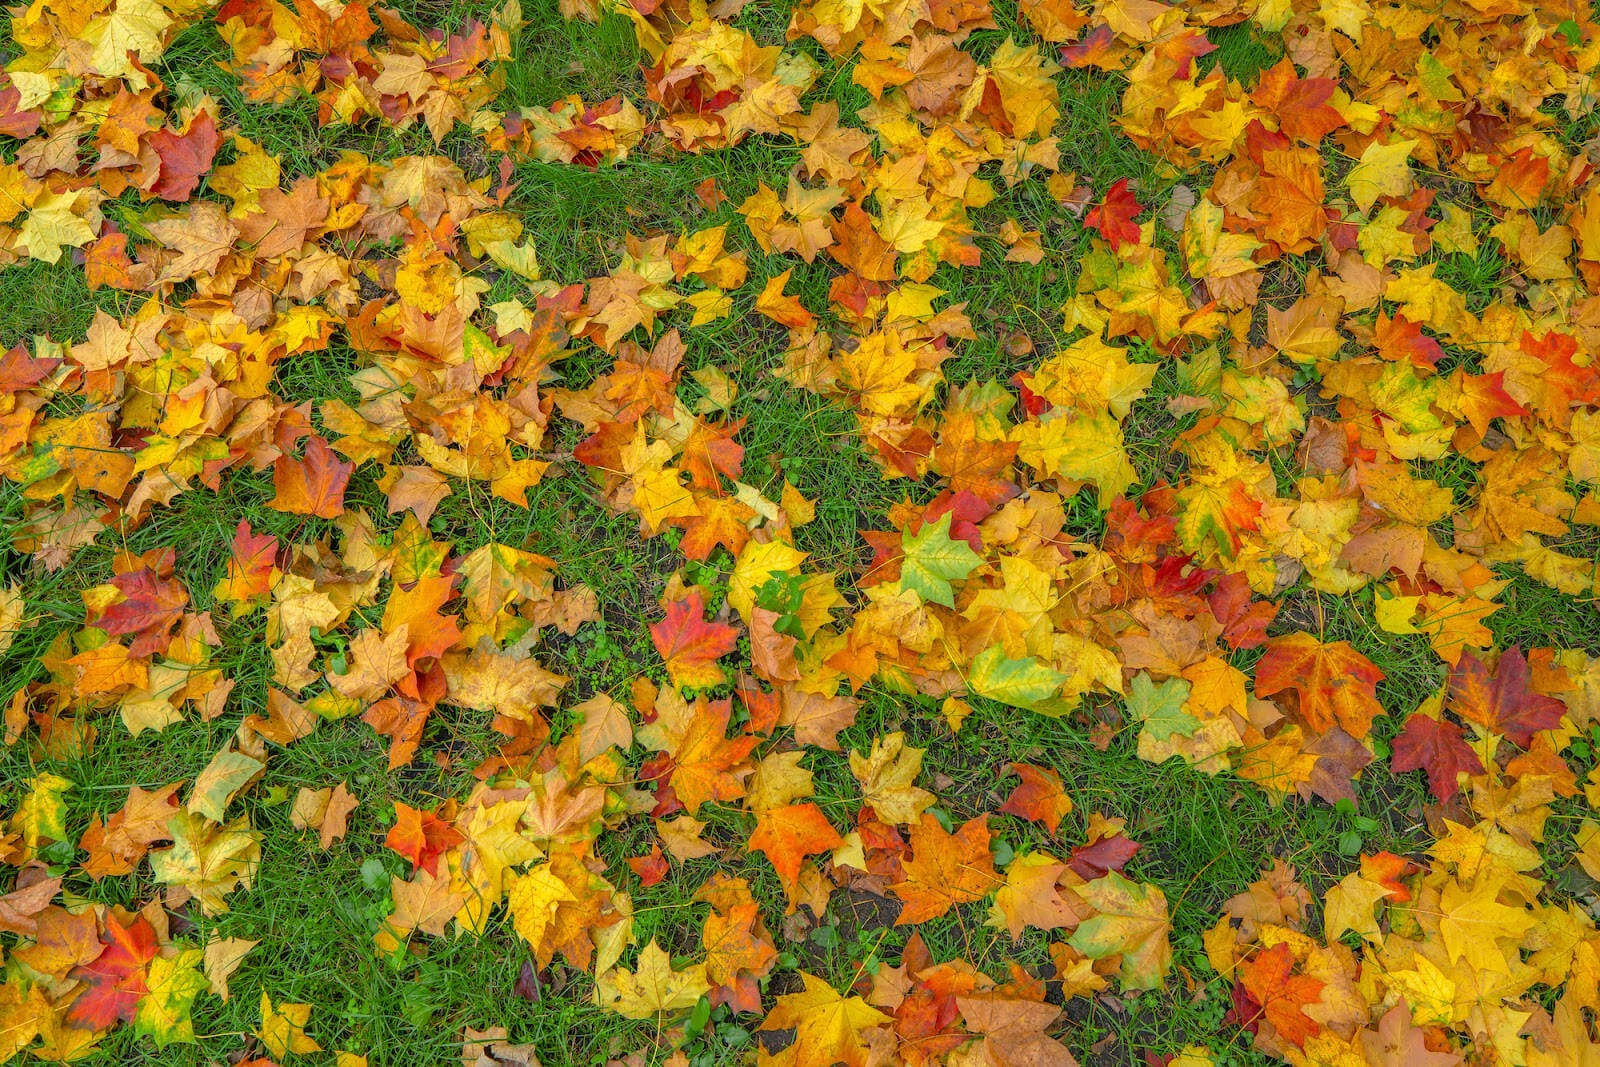 Colorful leaves on a lawn.